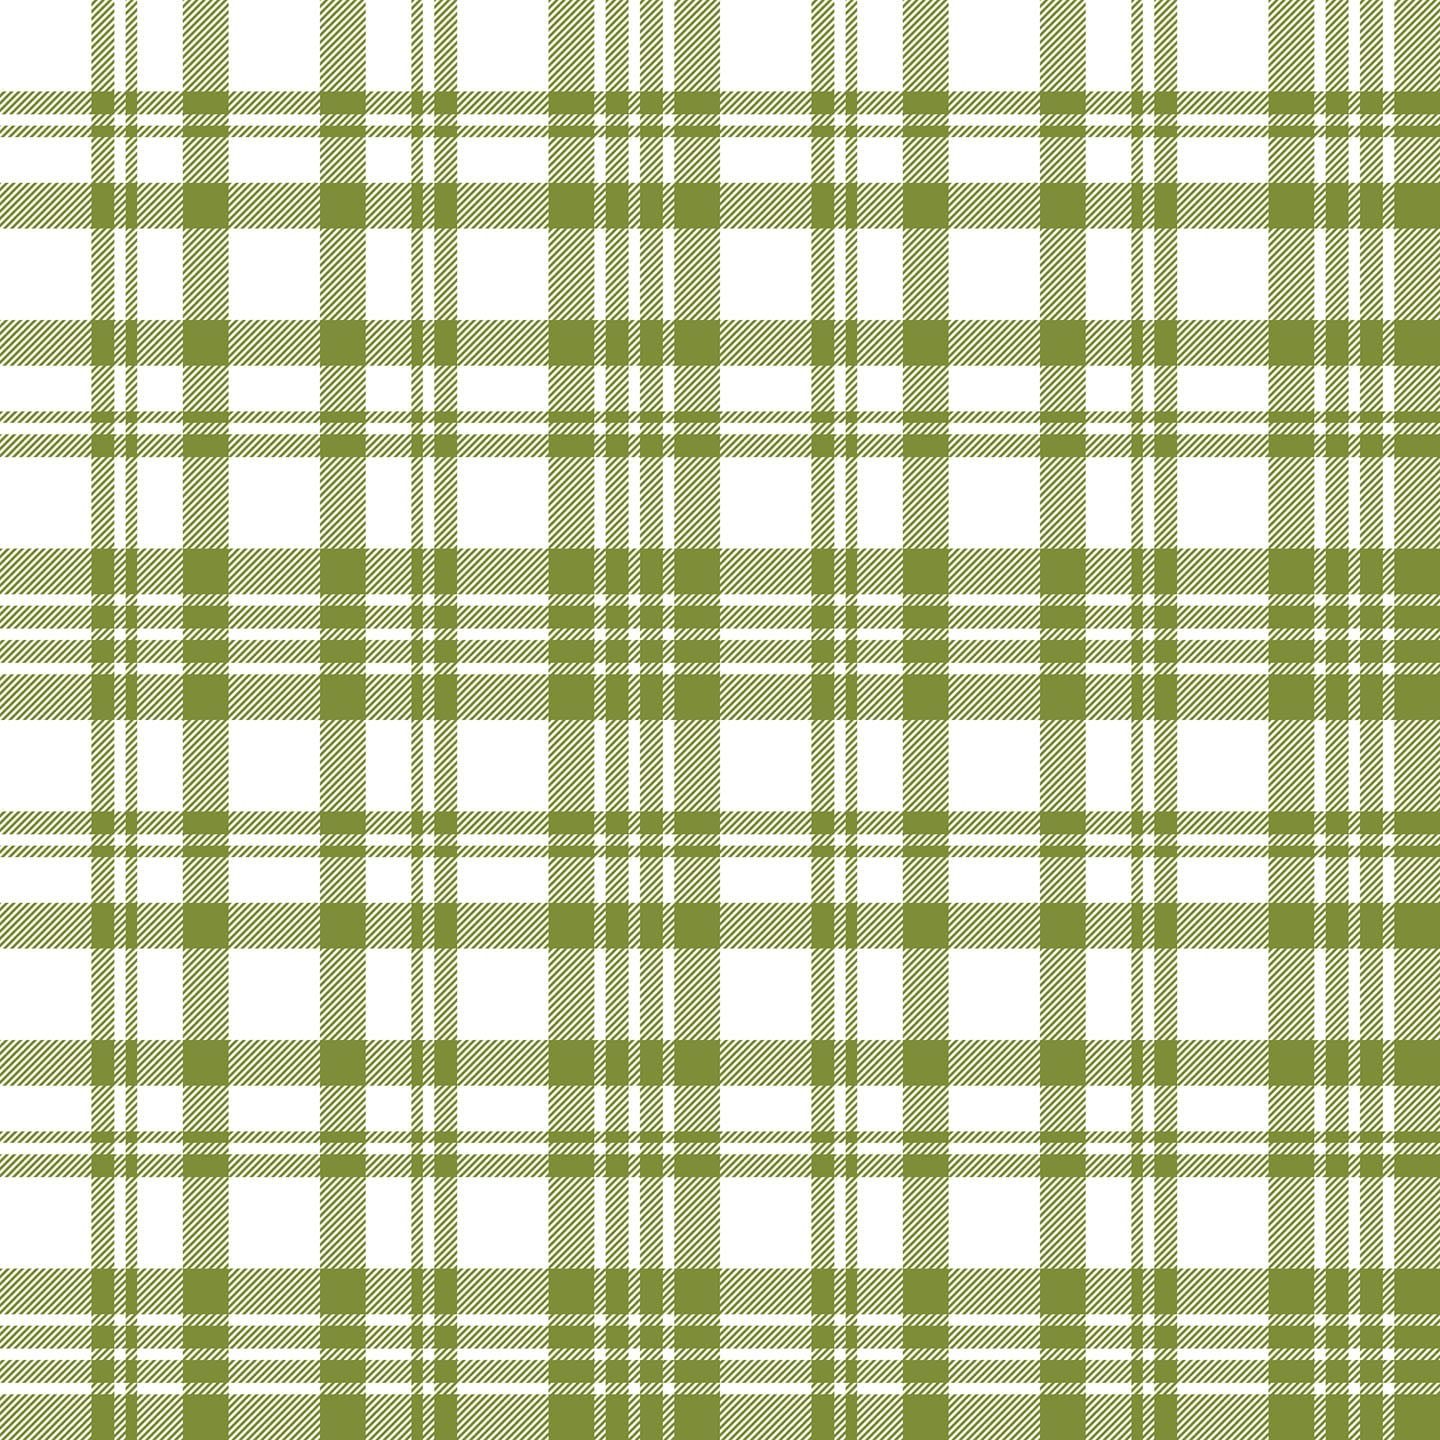 Green and white plaid fabric texture in a square pattern - Checkered, soft green